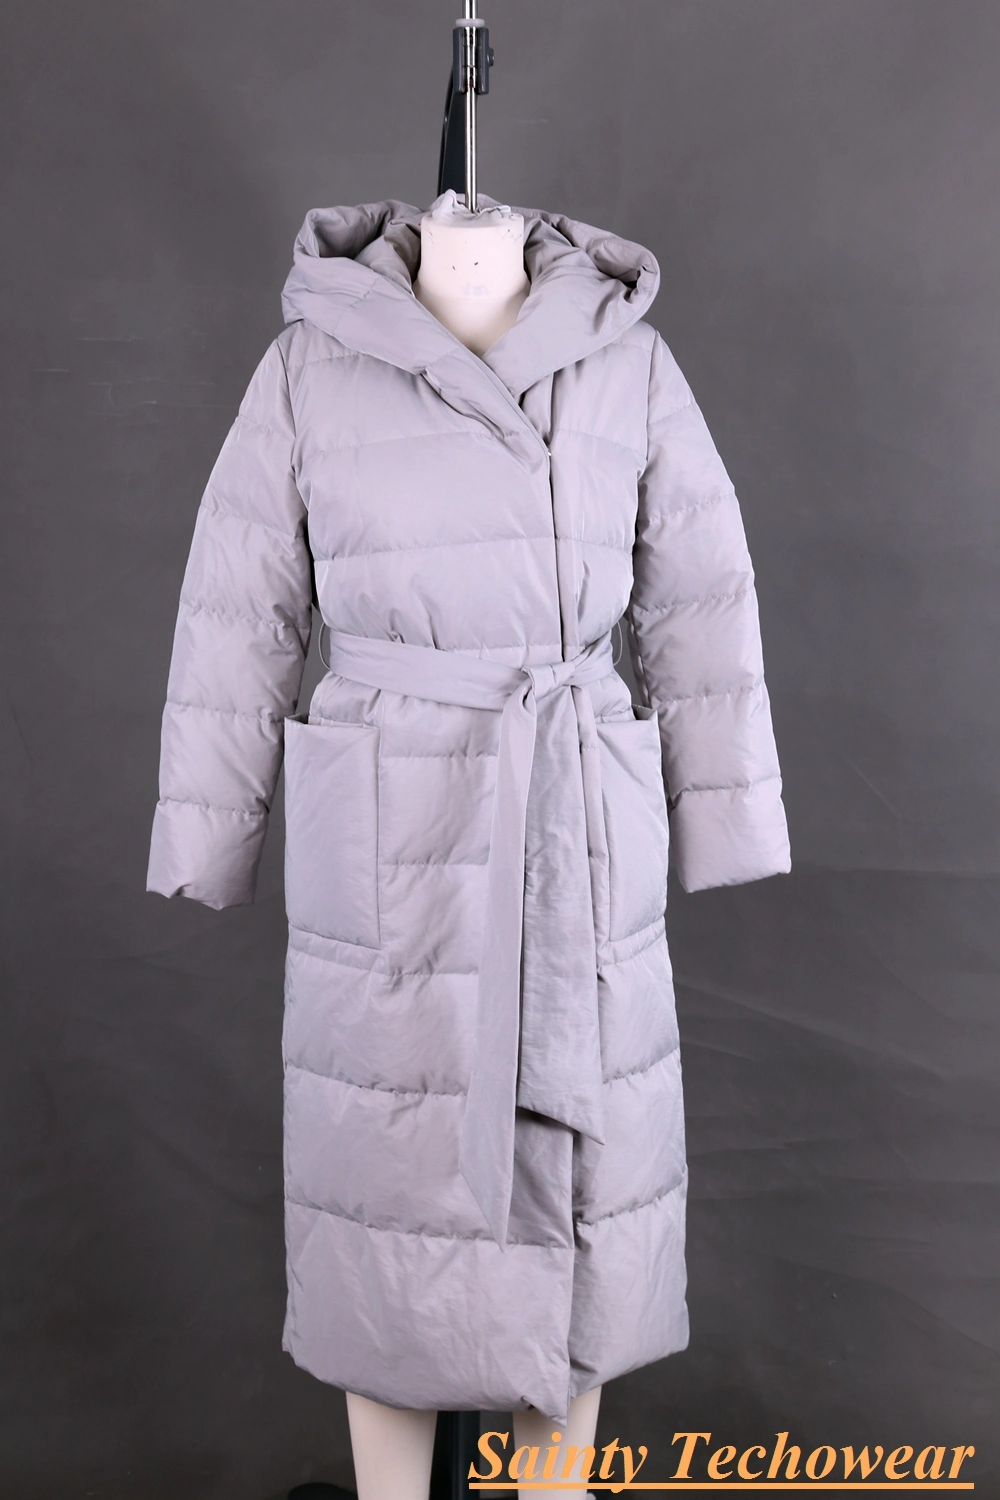 Ladies' Waist Belt and Patch Pocket Long Down Jacket